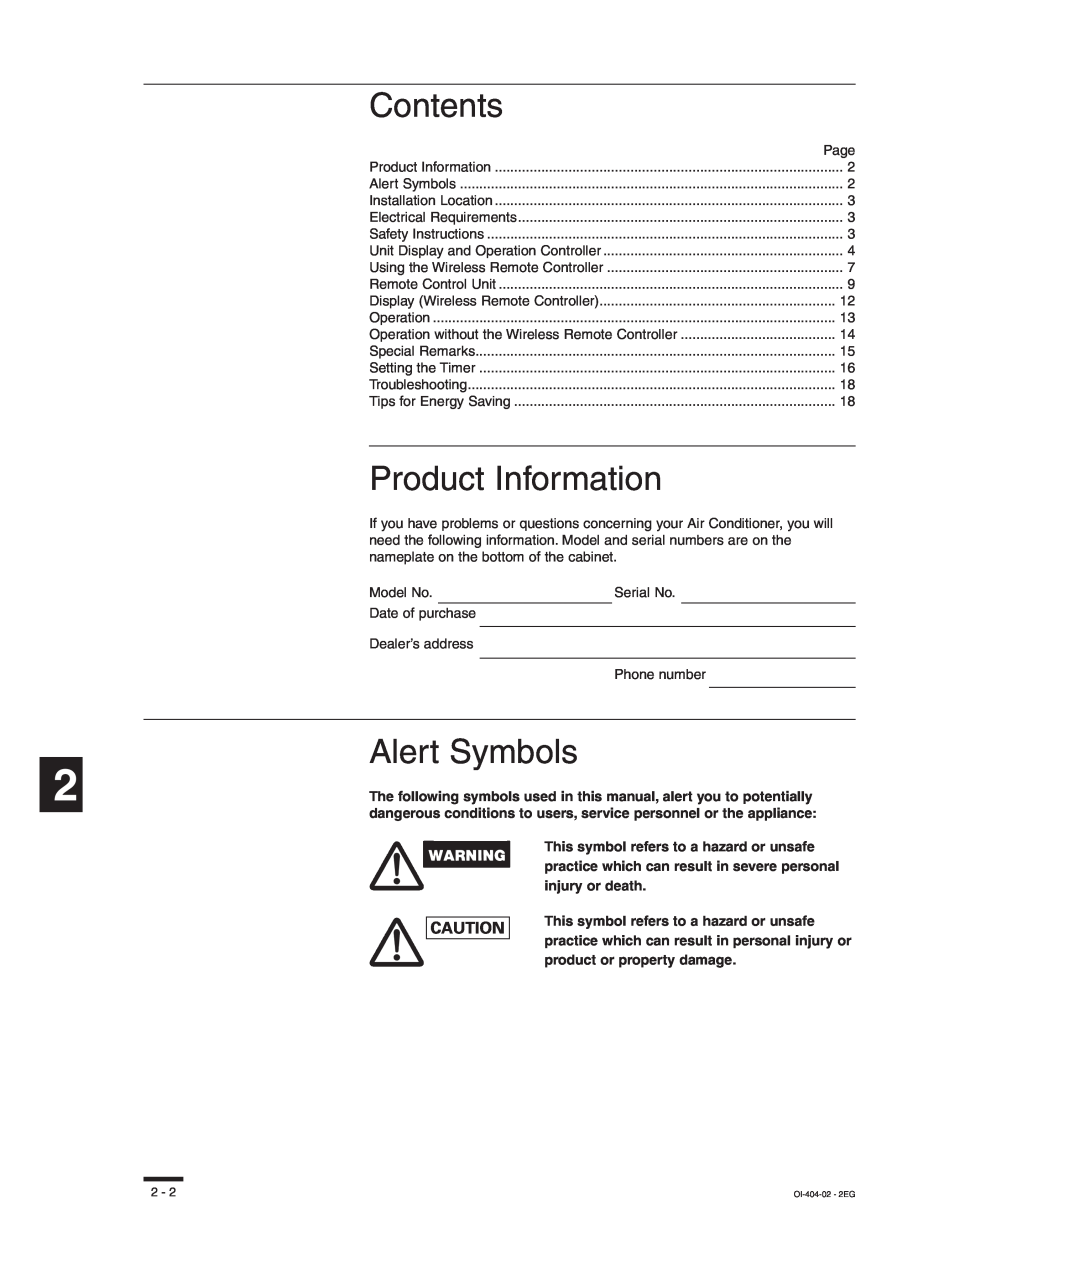 Sanyo RCS-SH80UG Contents, Product Information, Alert Symbols, This symbol refers to a hazard or unsafe, injury or death 